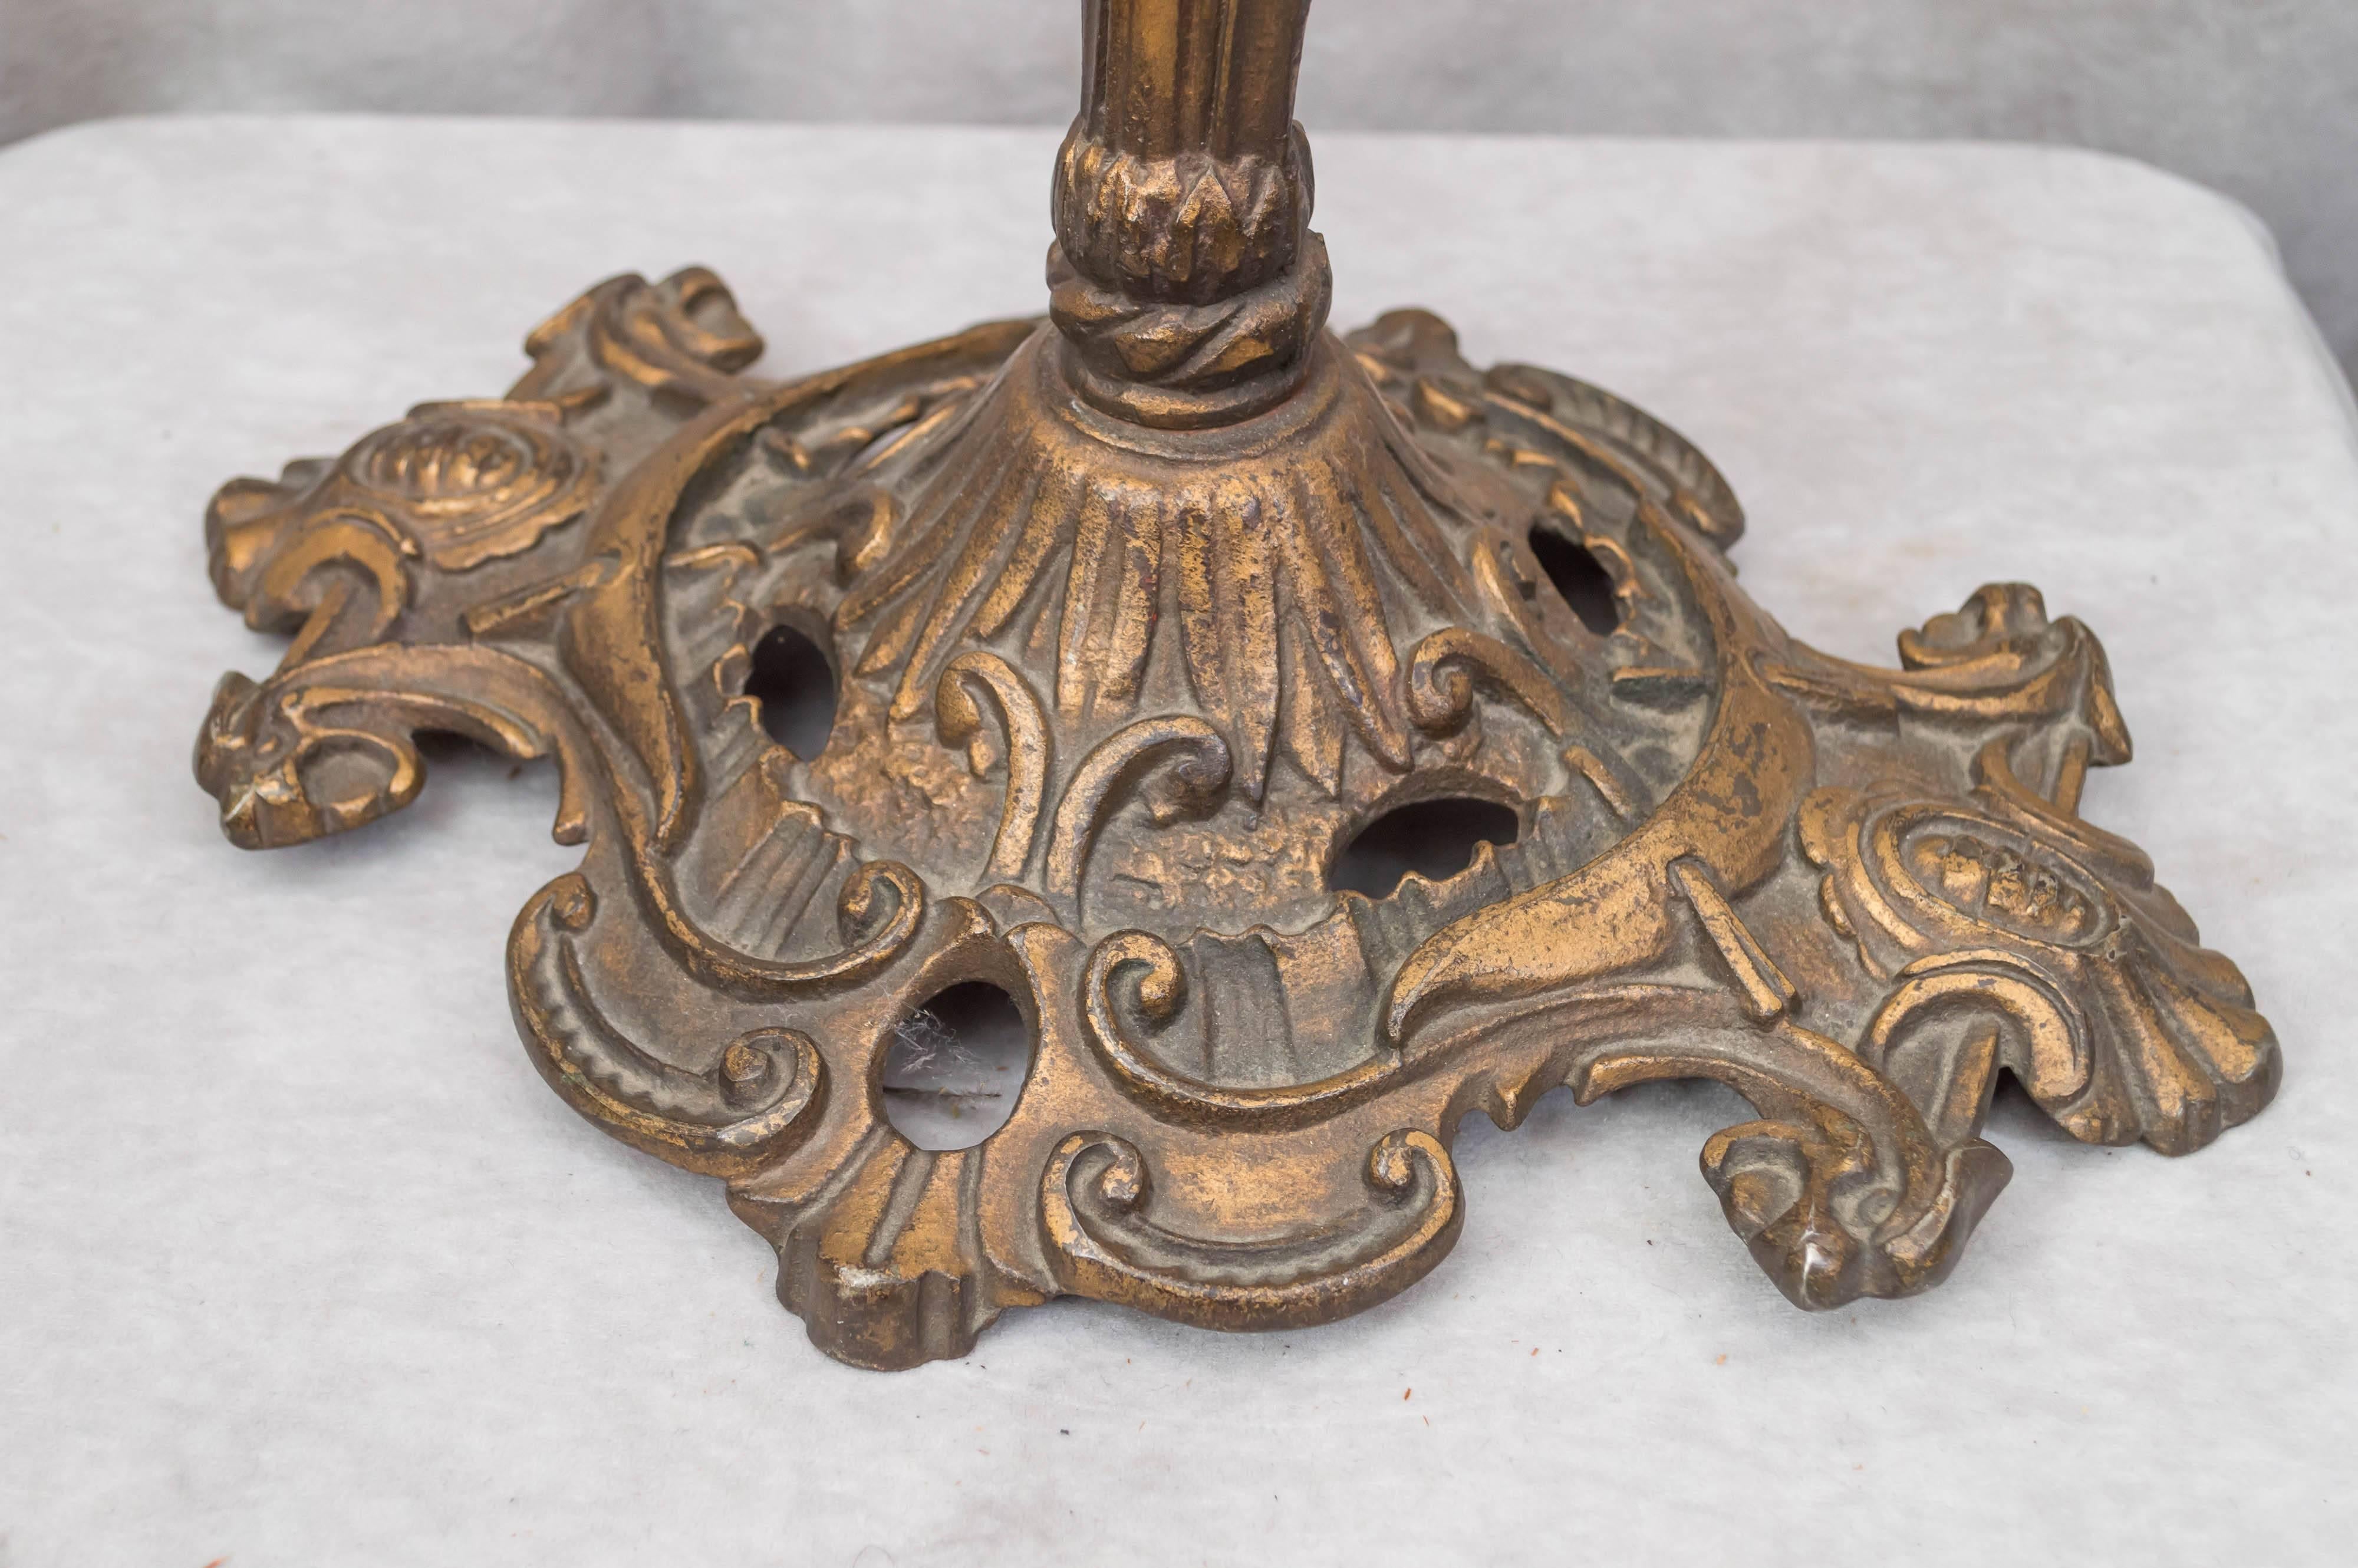 Cast Iron Ash Tray or Cup Holder with an American Indian 1